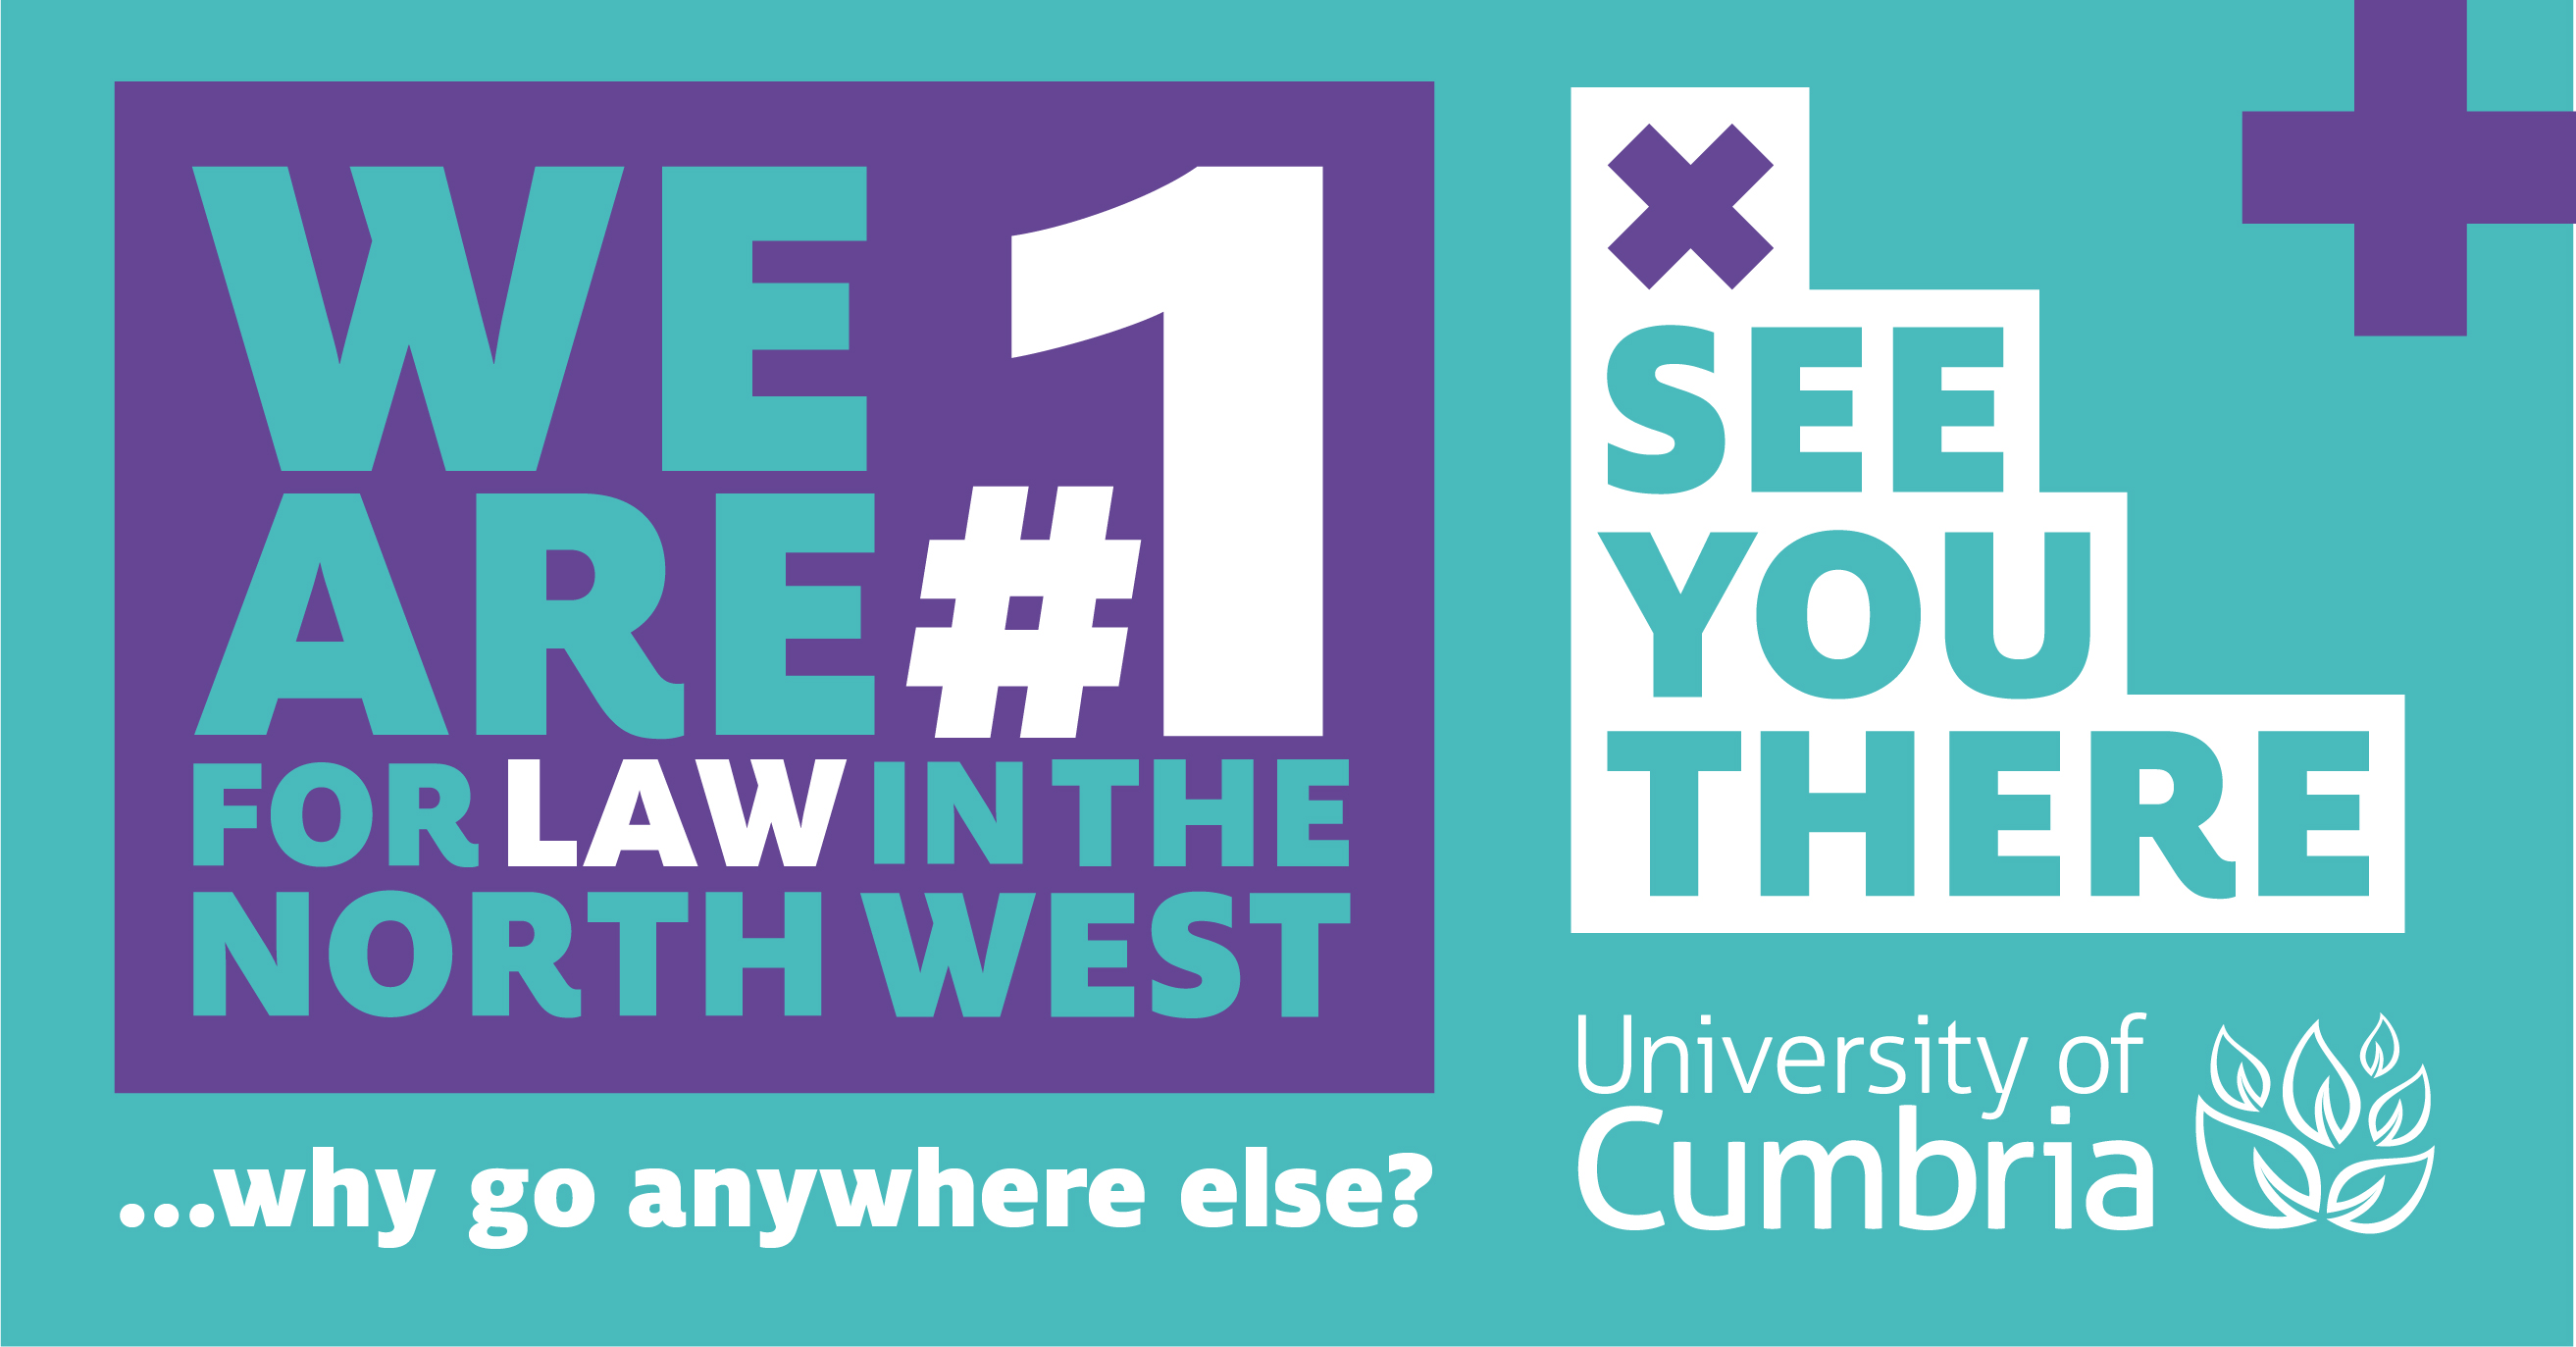 Law: 1st in the North West and in the Top 10 Nationally according to the Guardian League Tables 